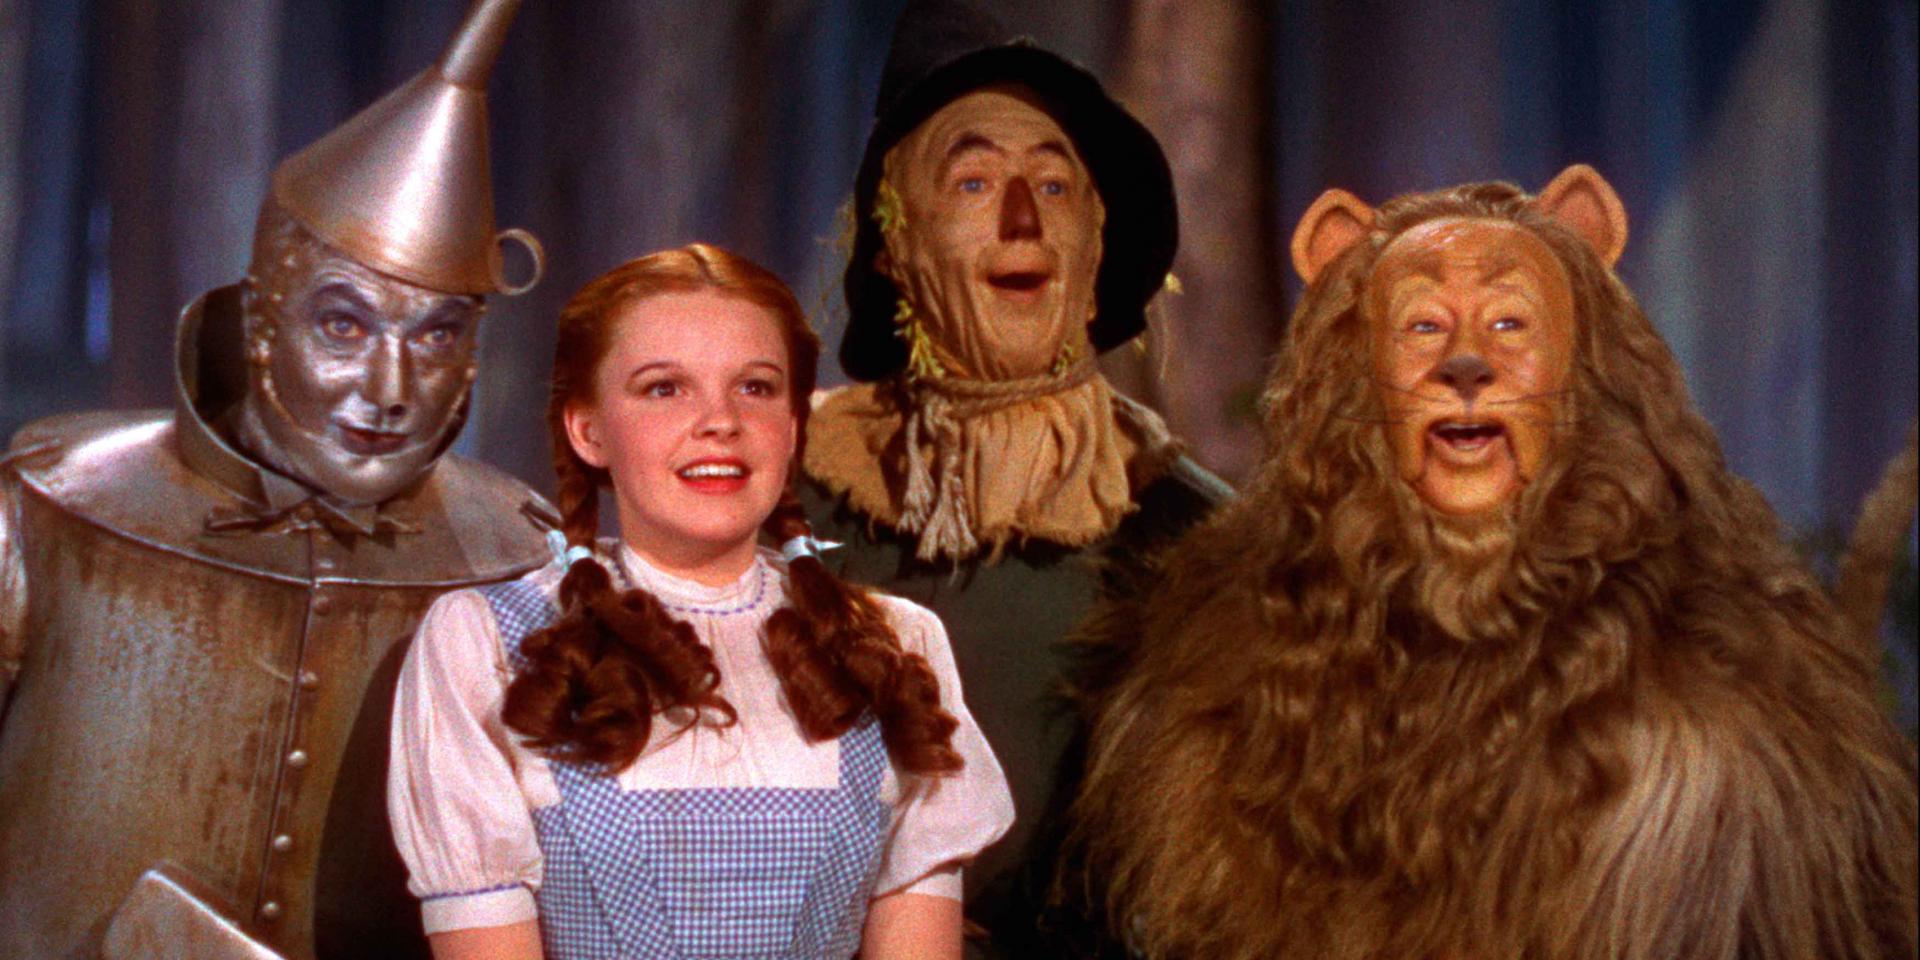 A scene from the film The Wizard of Oz (1939) by Victor Fleming